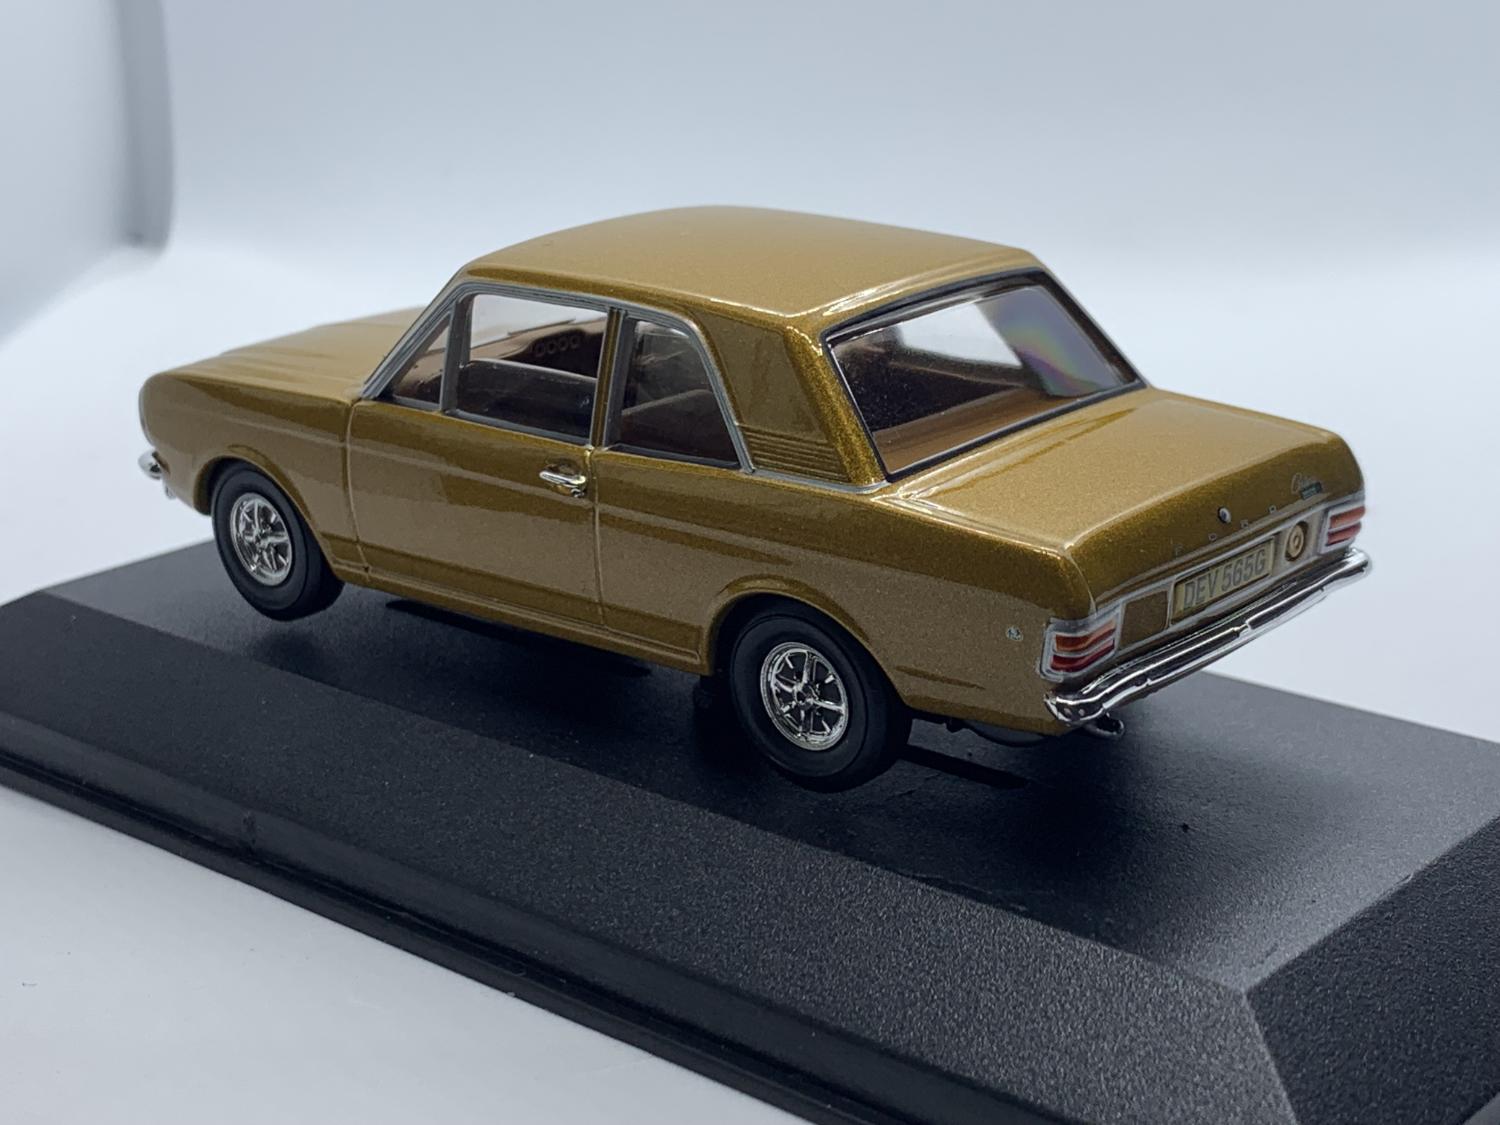 Lotus Ford Cortina mk 2 Twin Cam (Lotus) in amber gold, 1968  Colin Chapman’s car, 1:43 scale model from Corgi Vanguards, limited edition model